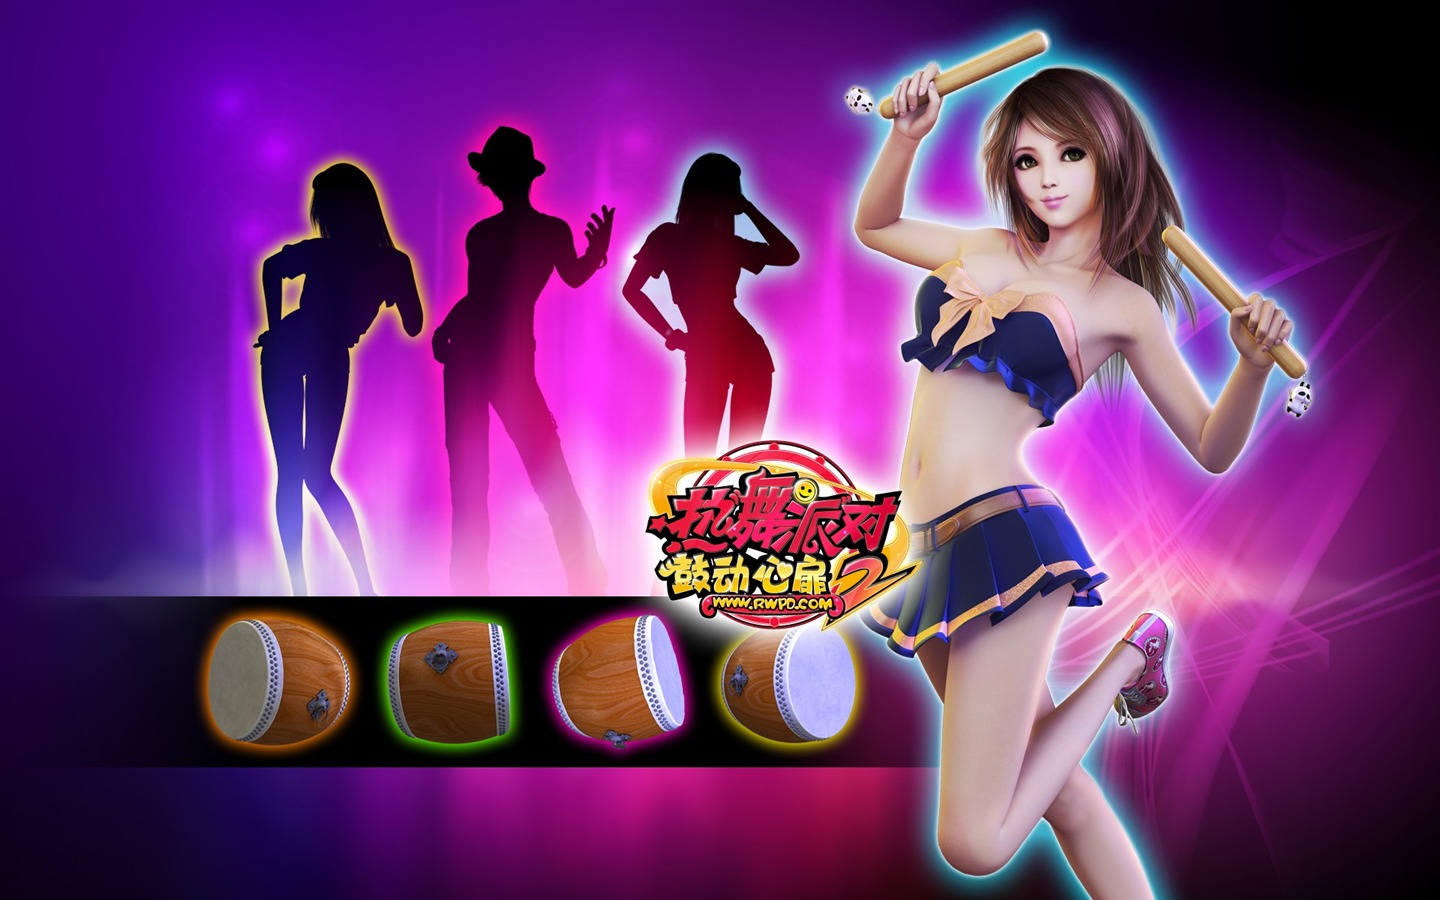 Online game Hot Dance Party II official wallpapers #15 - 1440x900